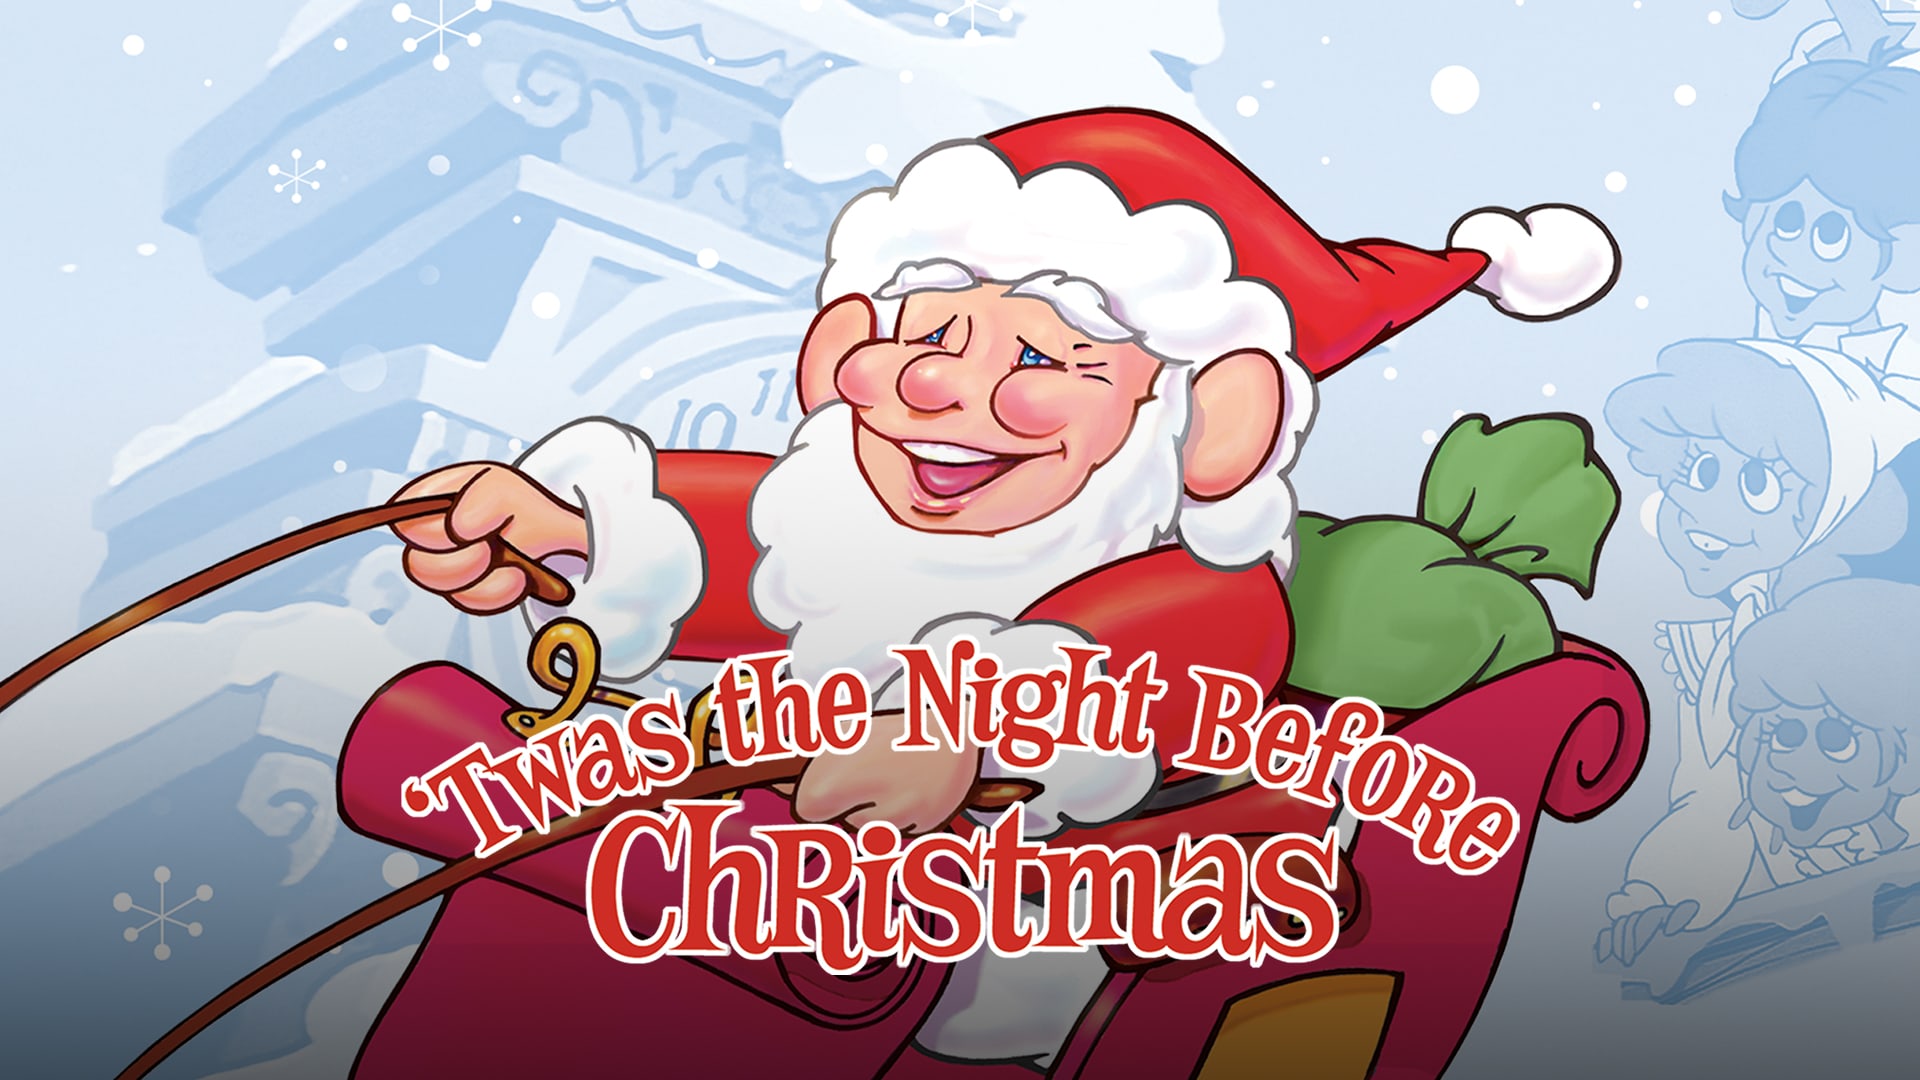 Watch 'Twas the Night Before Christmas Online | Stream Full Movies